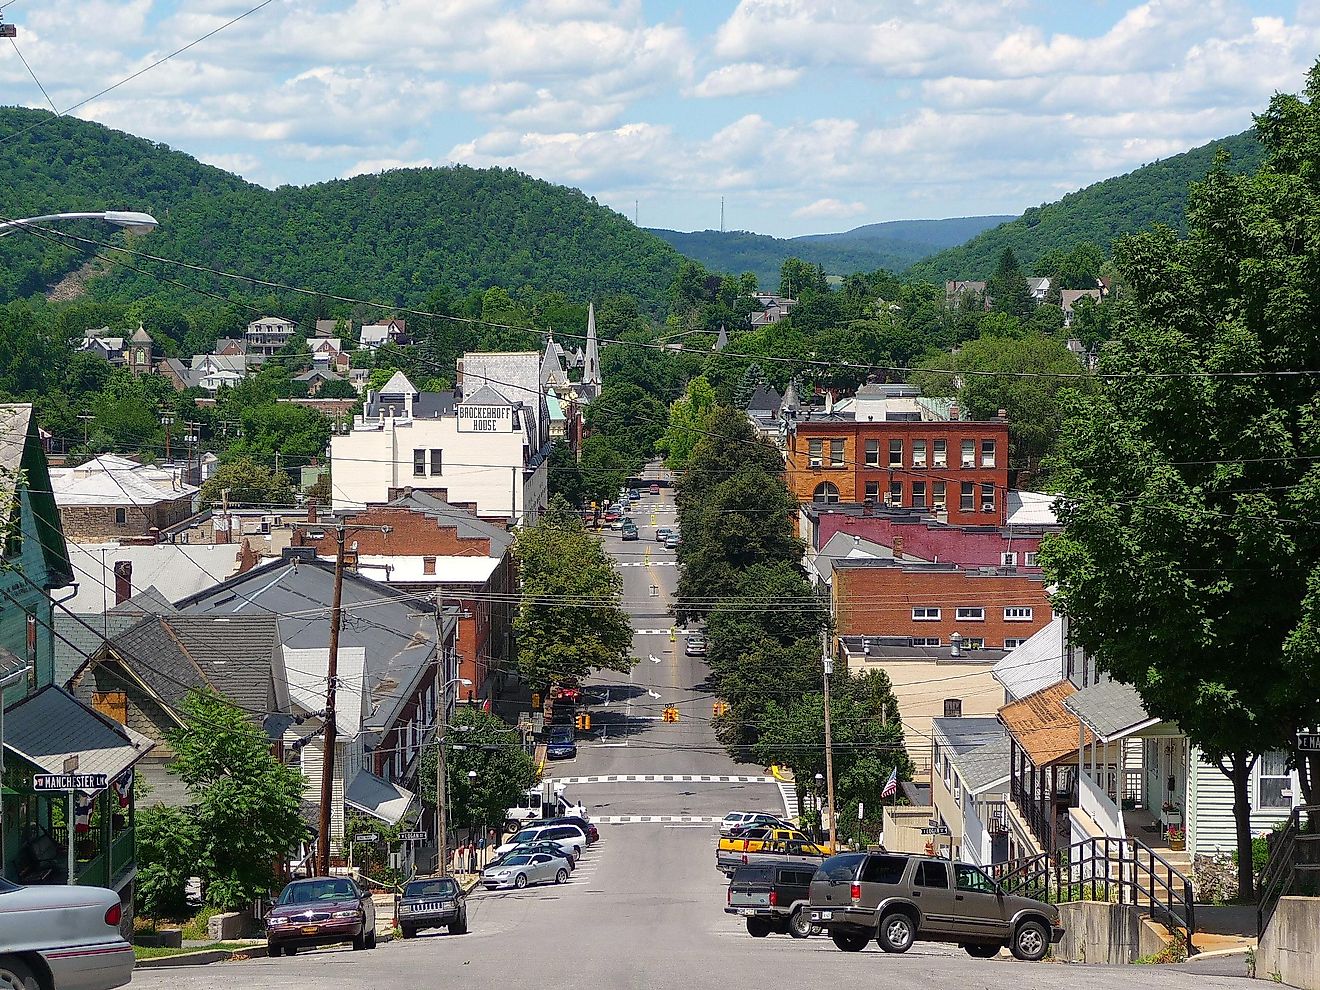 Looking down Allegheny Street from Reservoir Hill in Bellefonte, Pennsylvania, By Jarryd Beard - Own work, CC BY-SA 3.0, - Wikimedia Commons